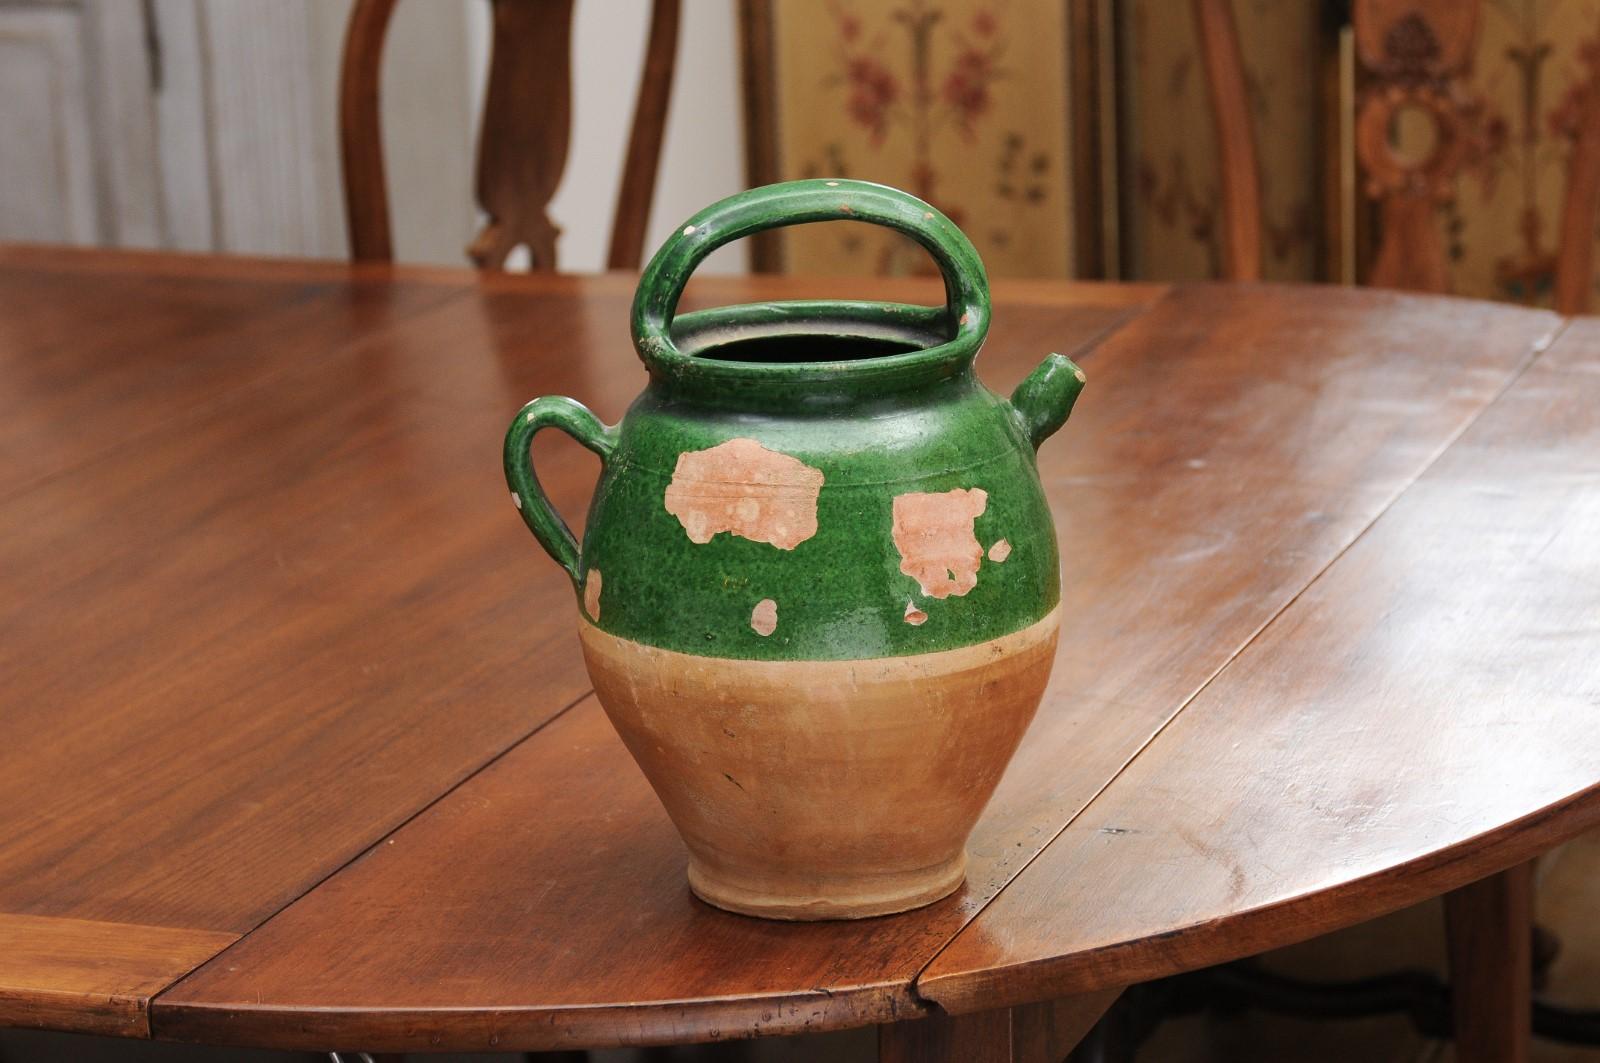 A French Provincial green glazed pottery olive oil jug from the 19th century, with two handles, front spout and distressed patina. Created in Southern France during the 19th century, this olive oil jug features a green glazed upper section perfectly